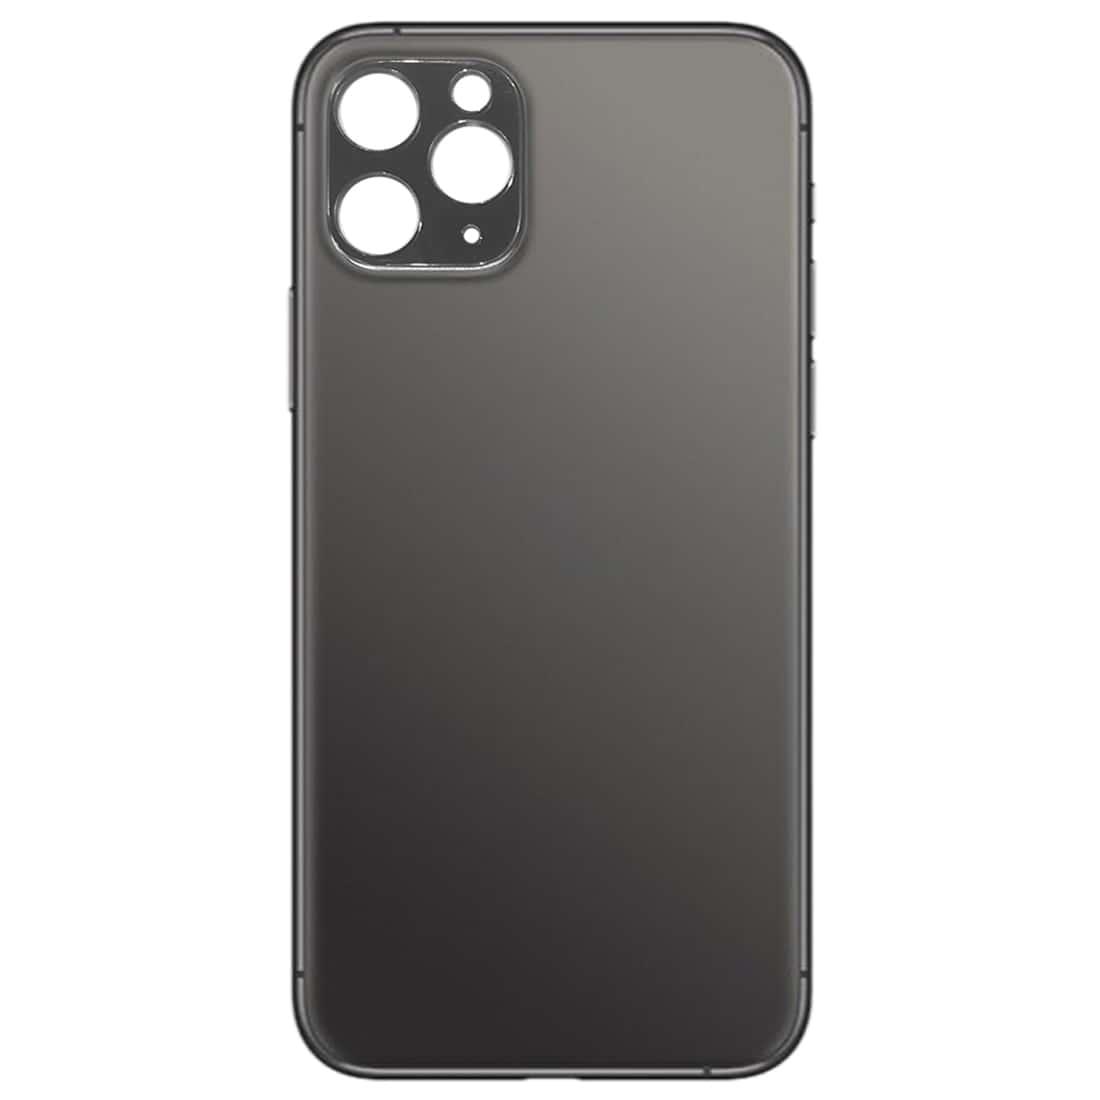 Back Glass Panel for  iPhone 11 Pro Max Black